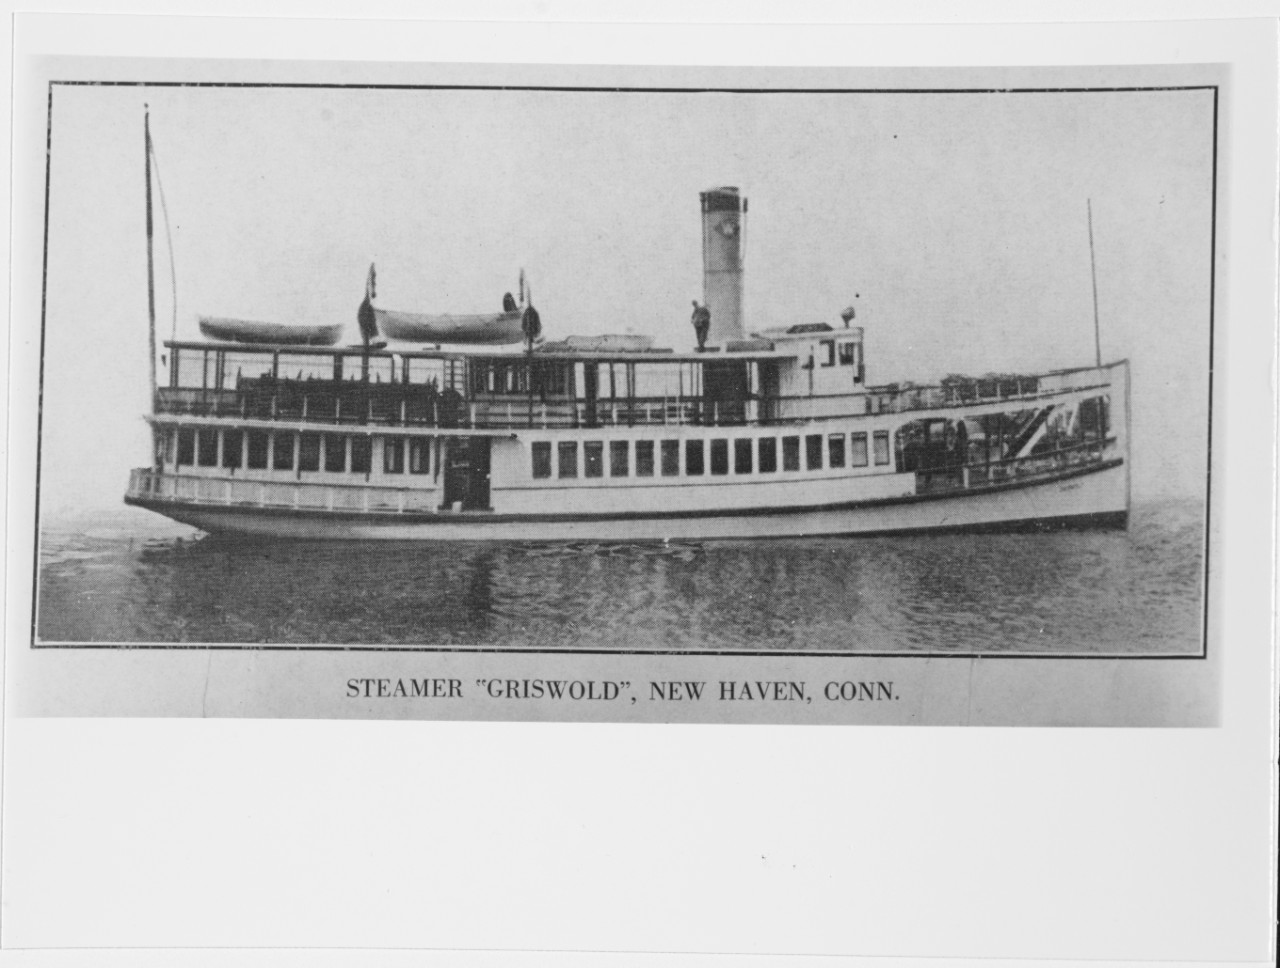 GRISWOLD (U.S. Ferry, 1899)